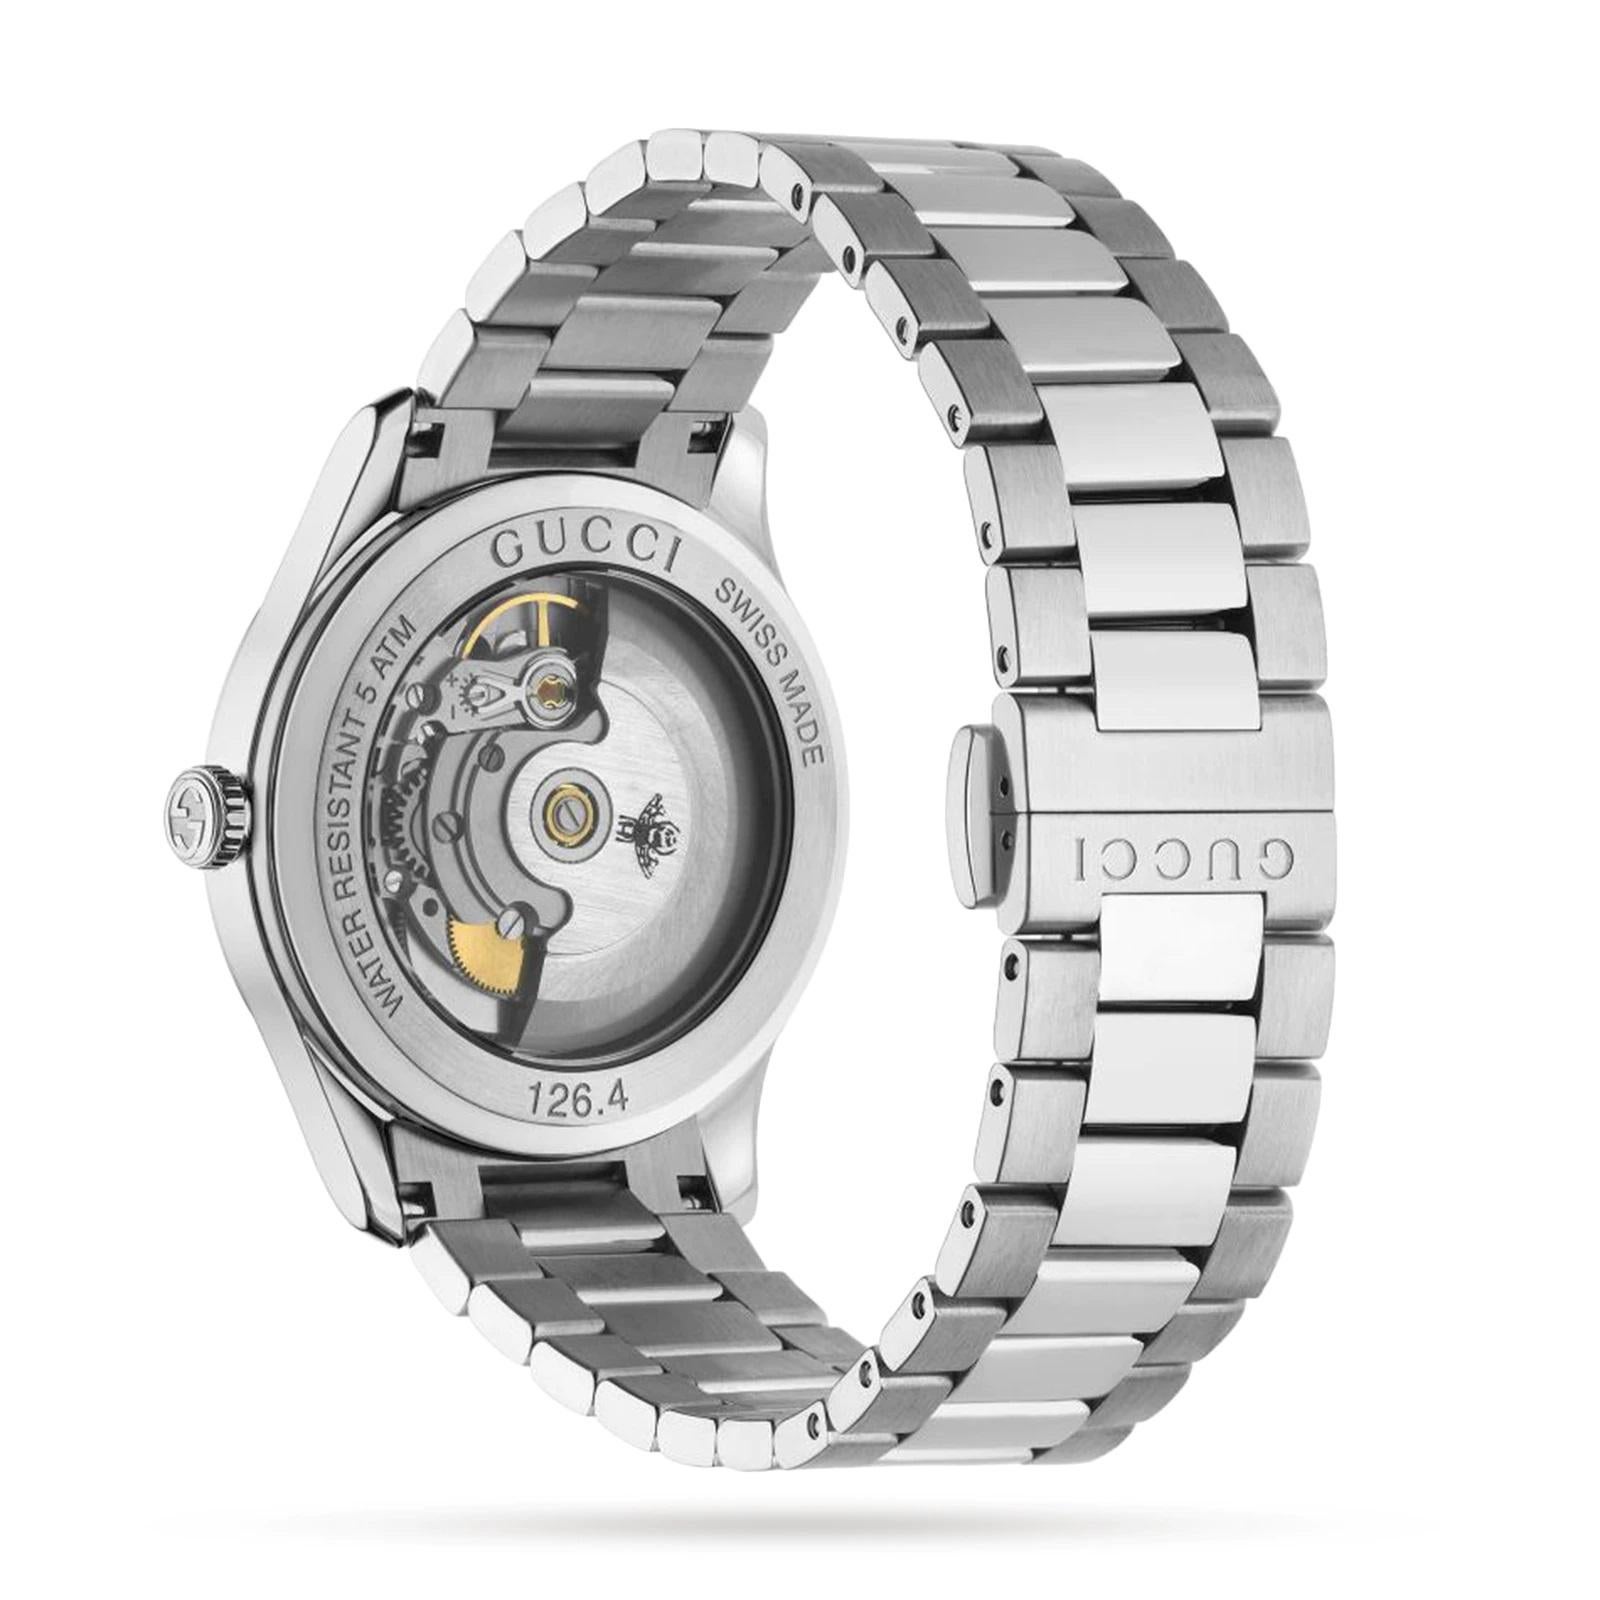 Part of the G-Timeless collection, this automatic watch is designed with a steel case and bracelet. The watch is characterized by the beautiful tiger eye stone dial, with each stone having a unique veining and color. At the center are bees, a